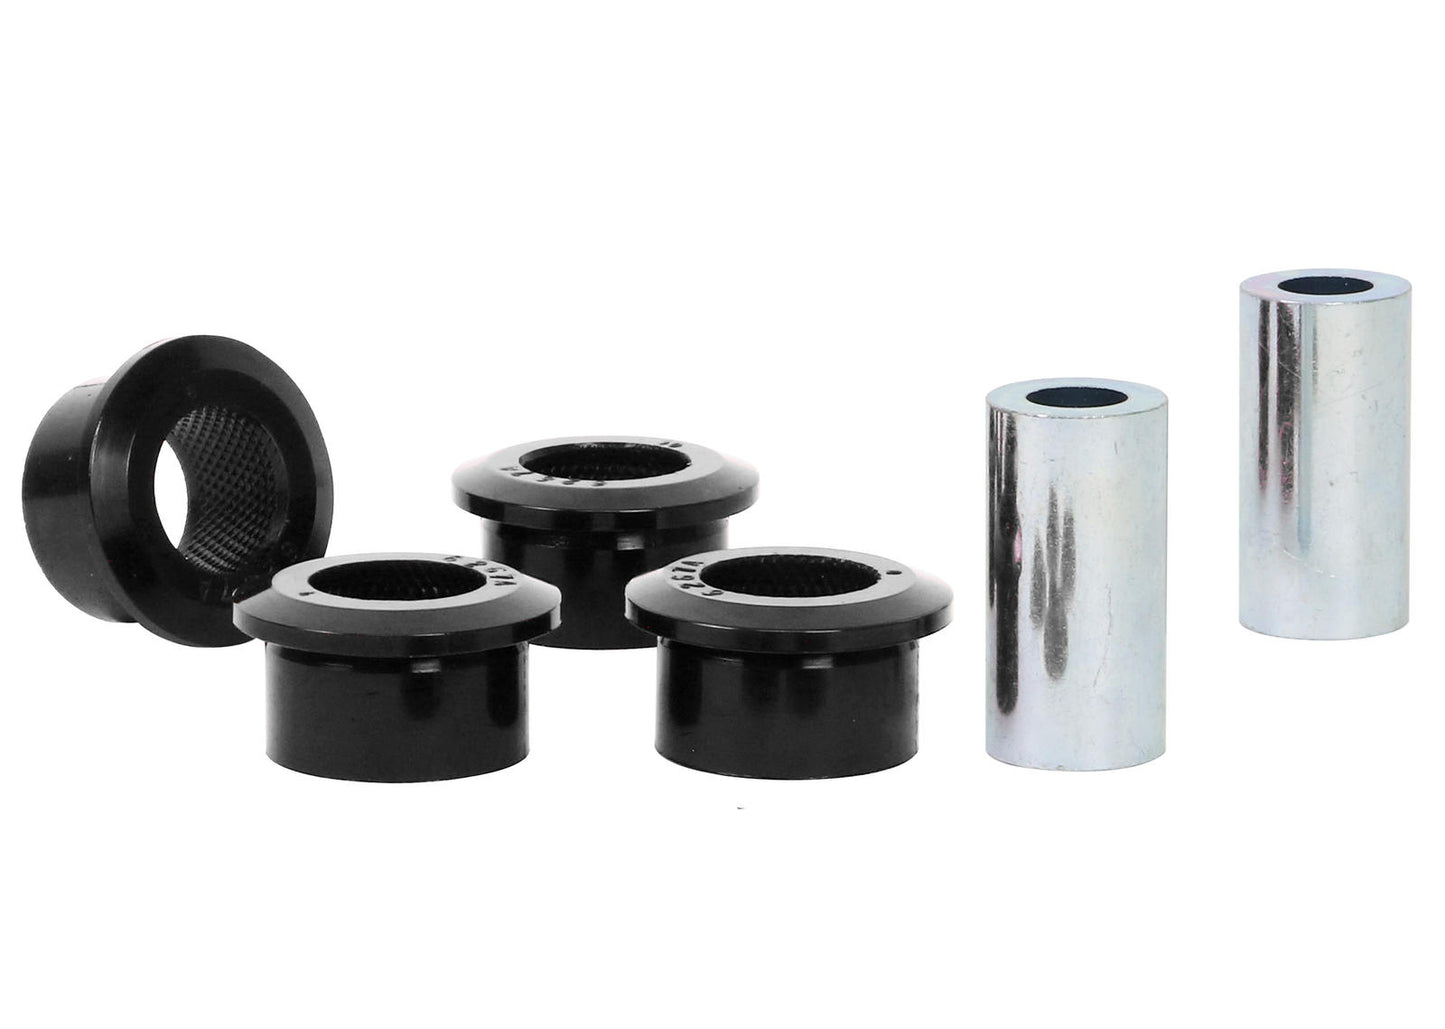 Control arm - upper front inner bushing